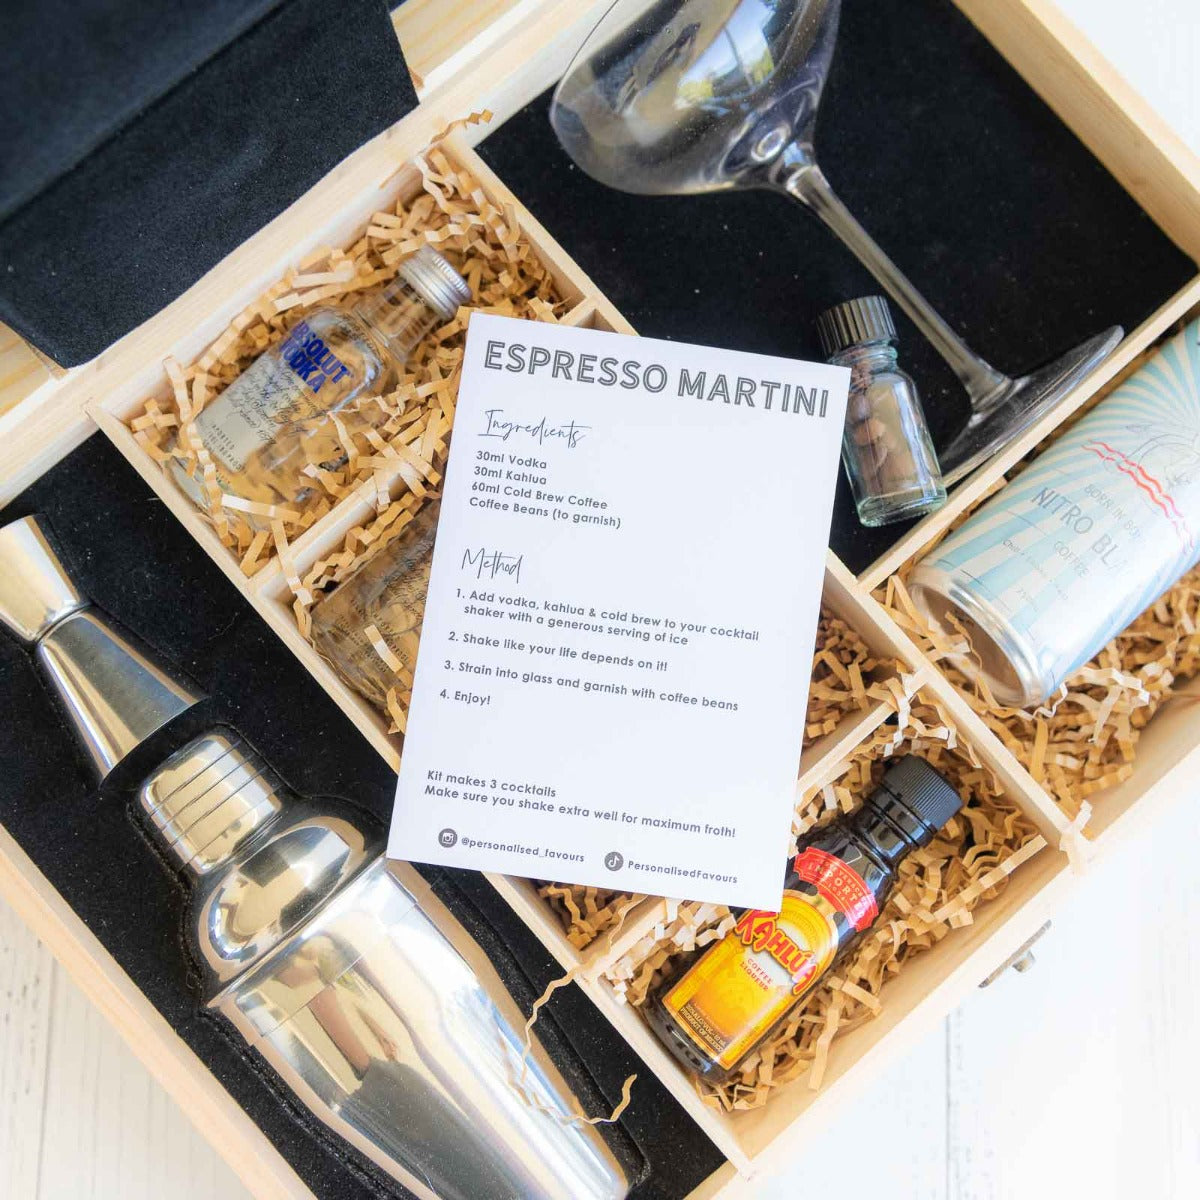 https://cdn.shopify.com/s/files/1/0726/9007/3910/products/wooden-gift-boxed-cocktail-set-espresso-martini-3.jpg?v=1677652903